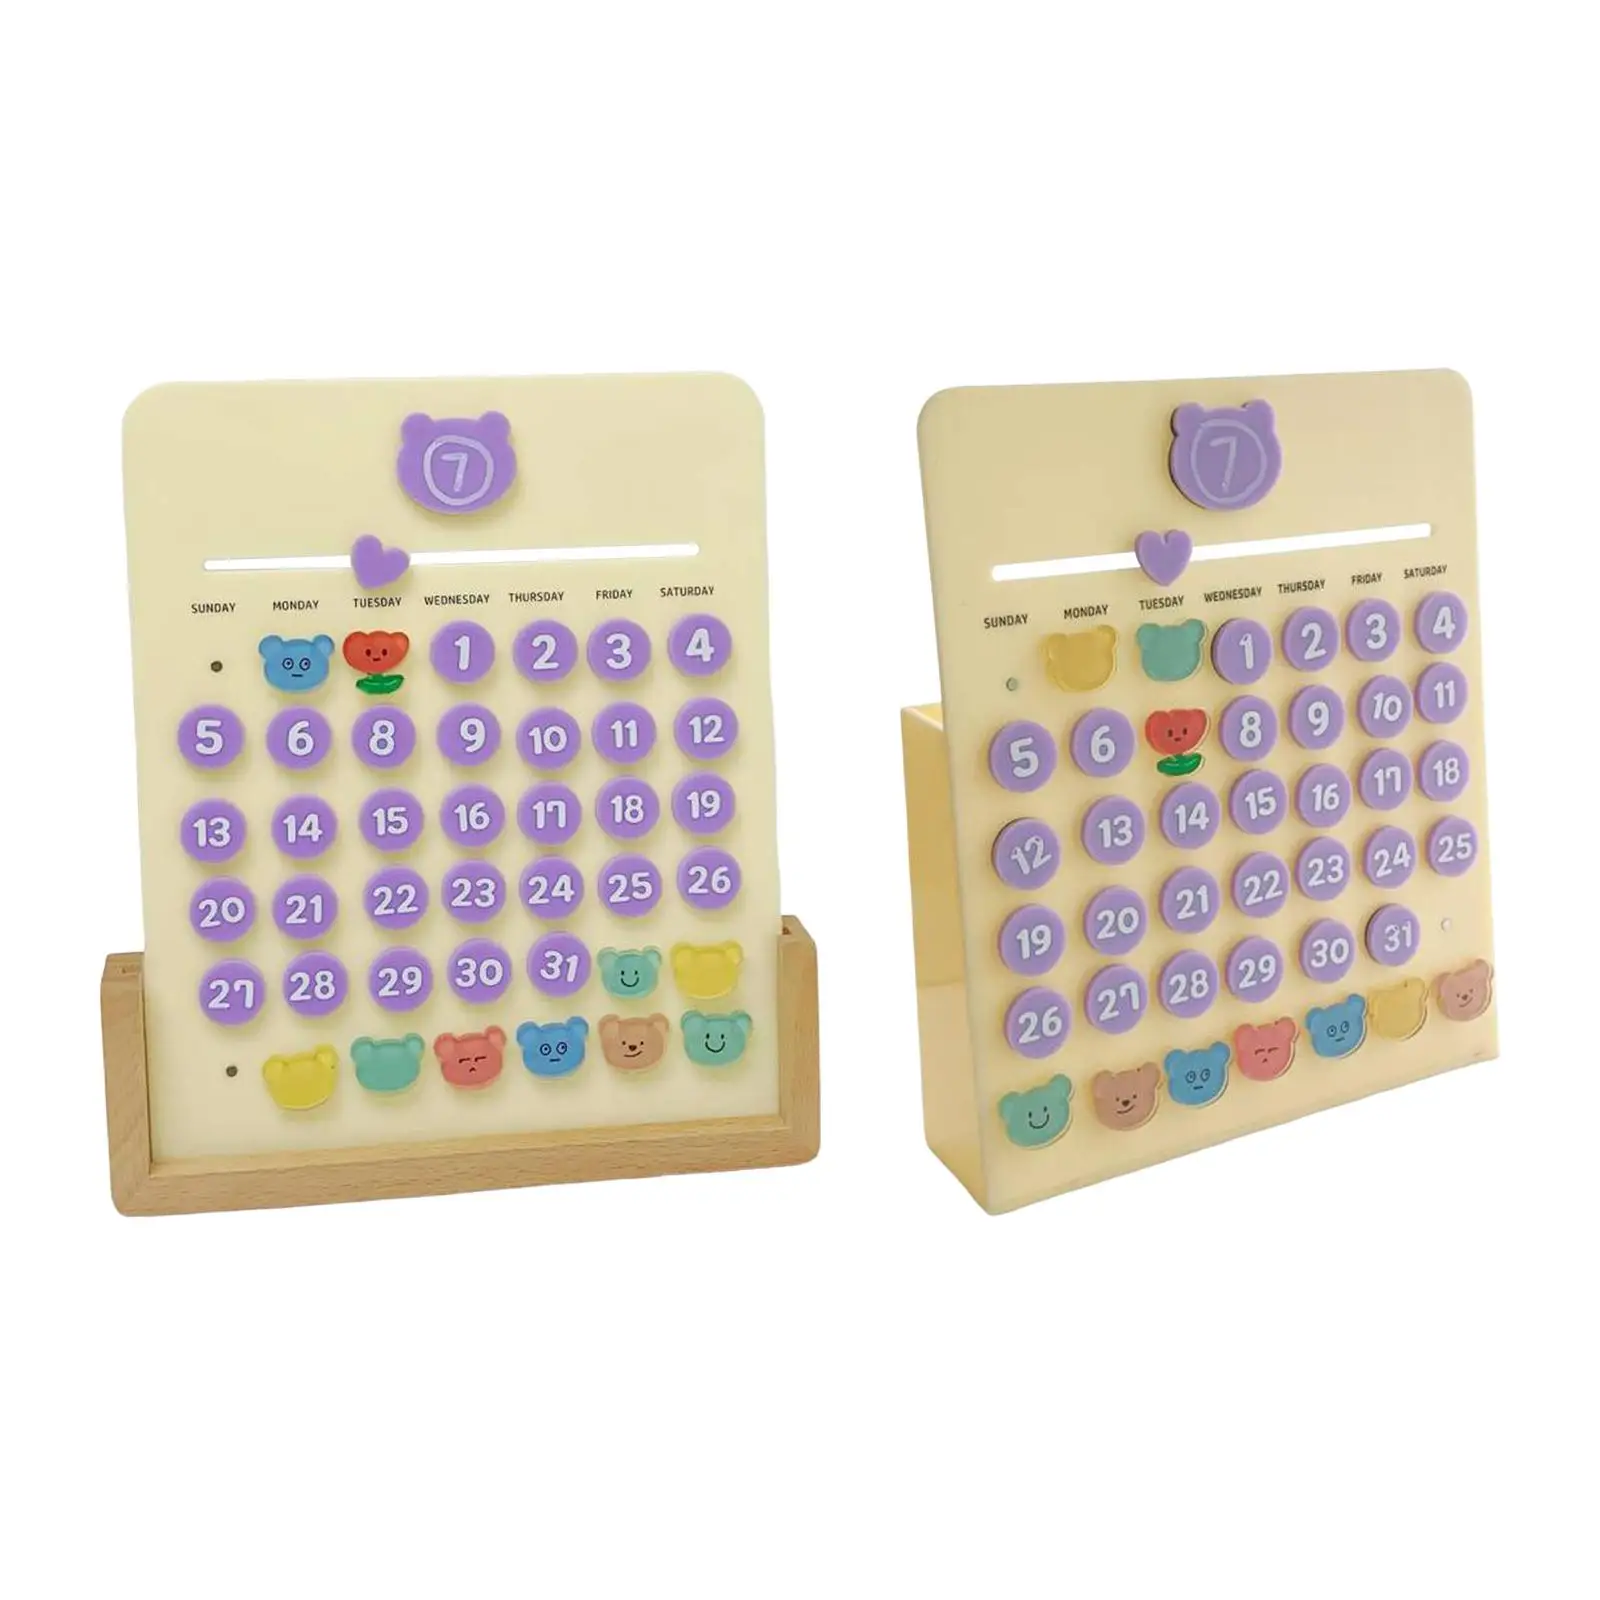 

Perpetual Calendar Educational Toys Kids Reusable Learn Months and Days of The Week Learning Calendar for Shops Home Decoration